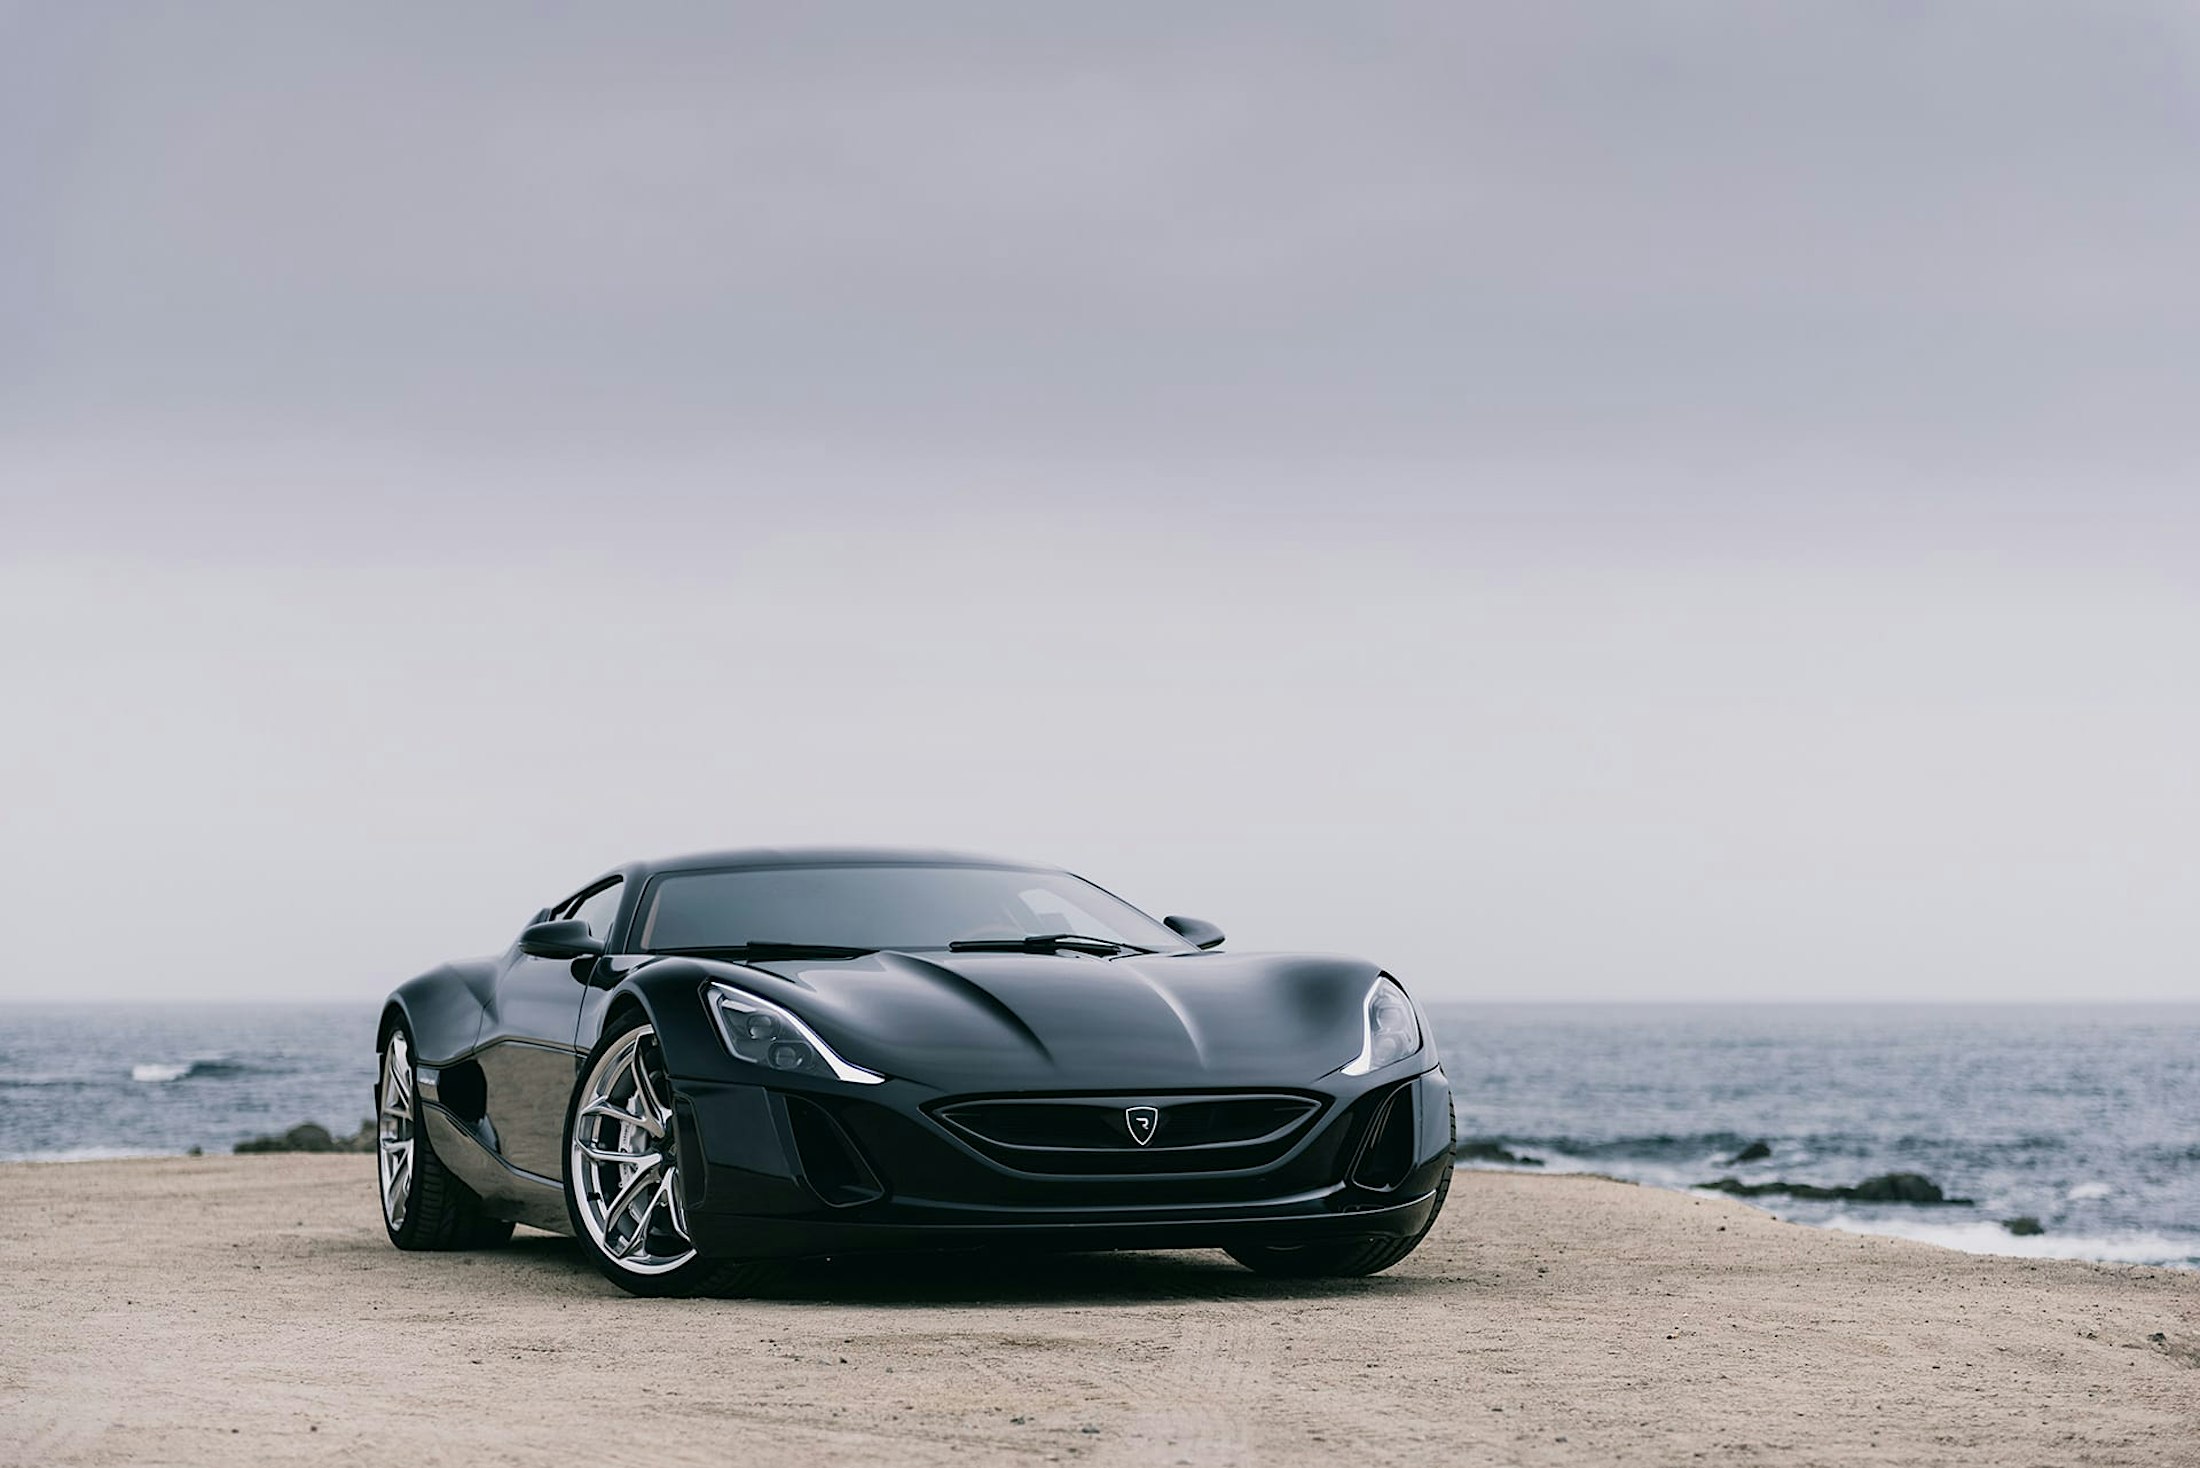 Rimac Concept_One at the Pebble Beach and Monterey Car Week 2017